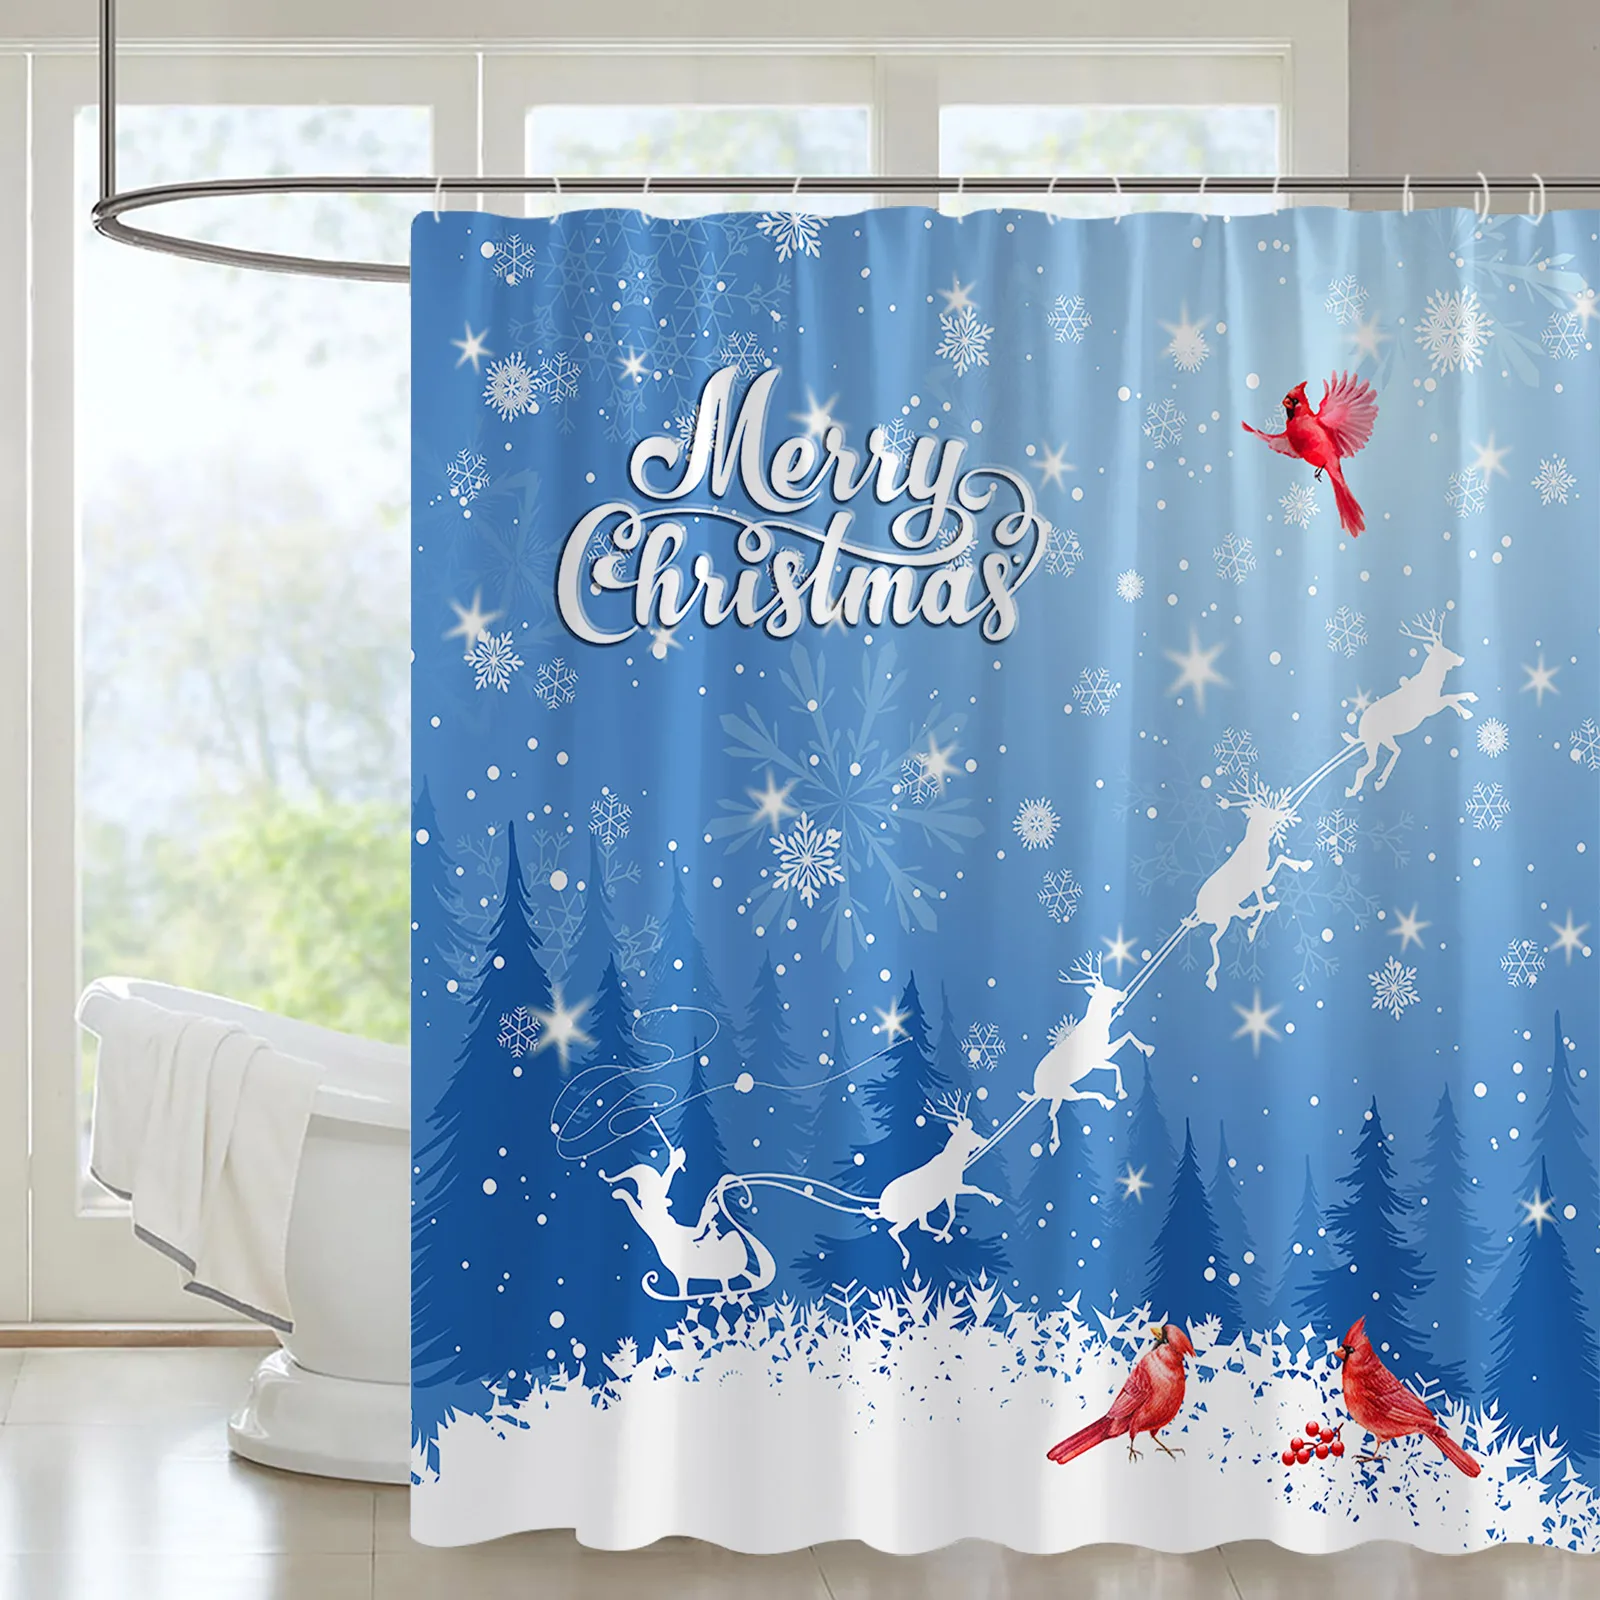 Christmas Shower Curtain Set Pine Forest Snowman Red Bird Snowflake Holiday Gift Snow Bath Decor Fabric Blue Curtains Hooks